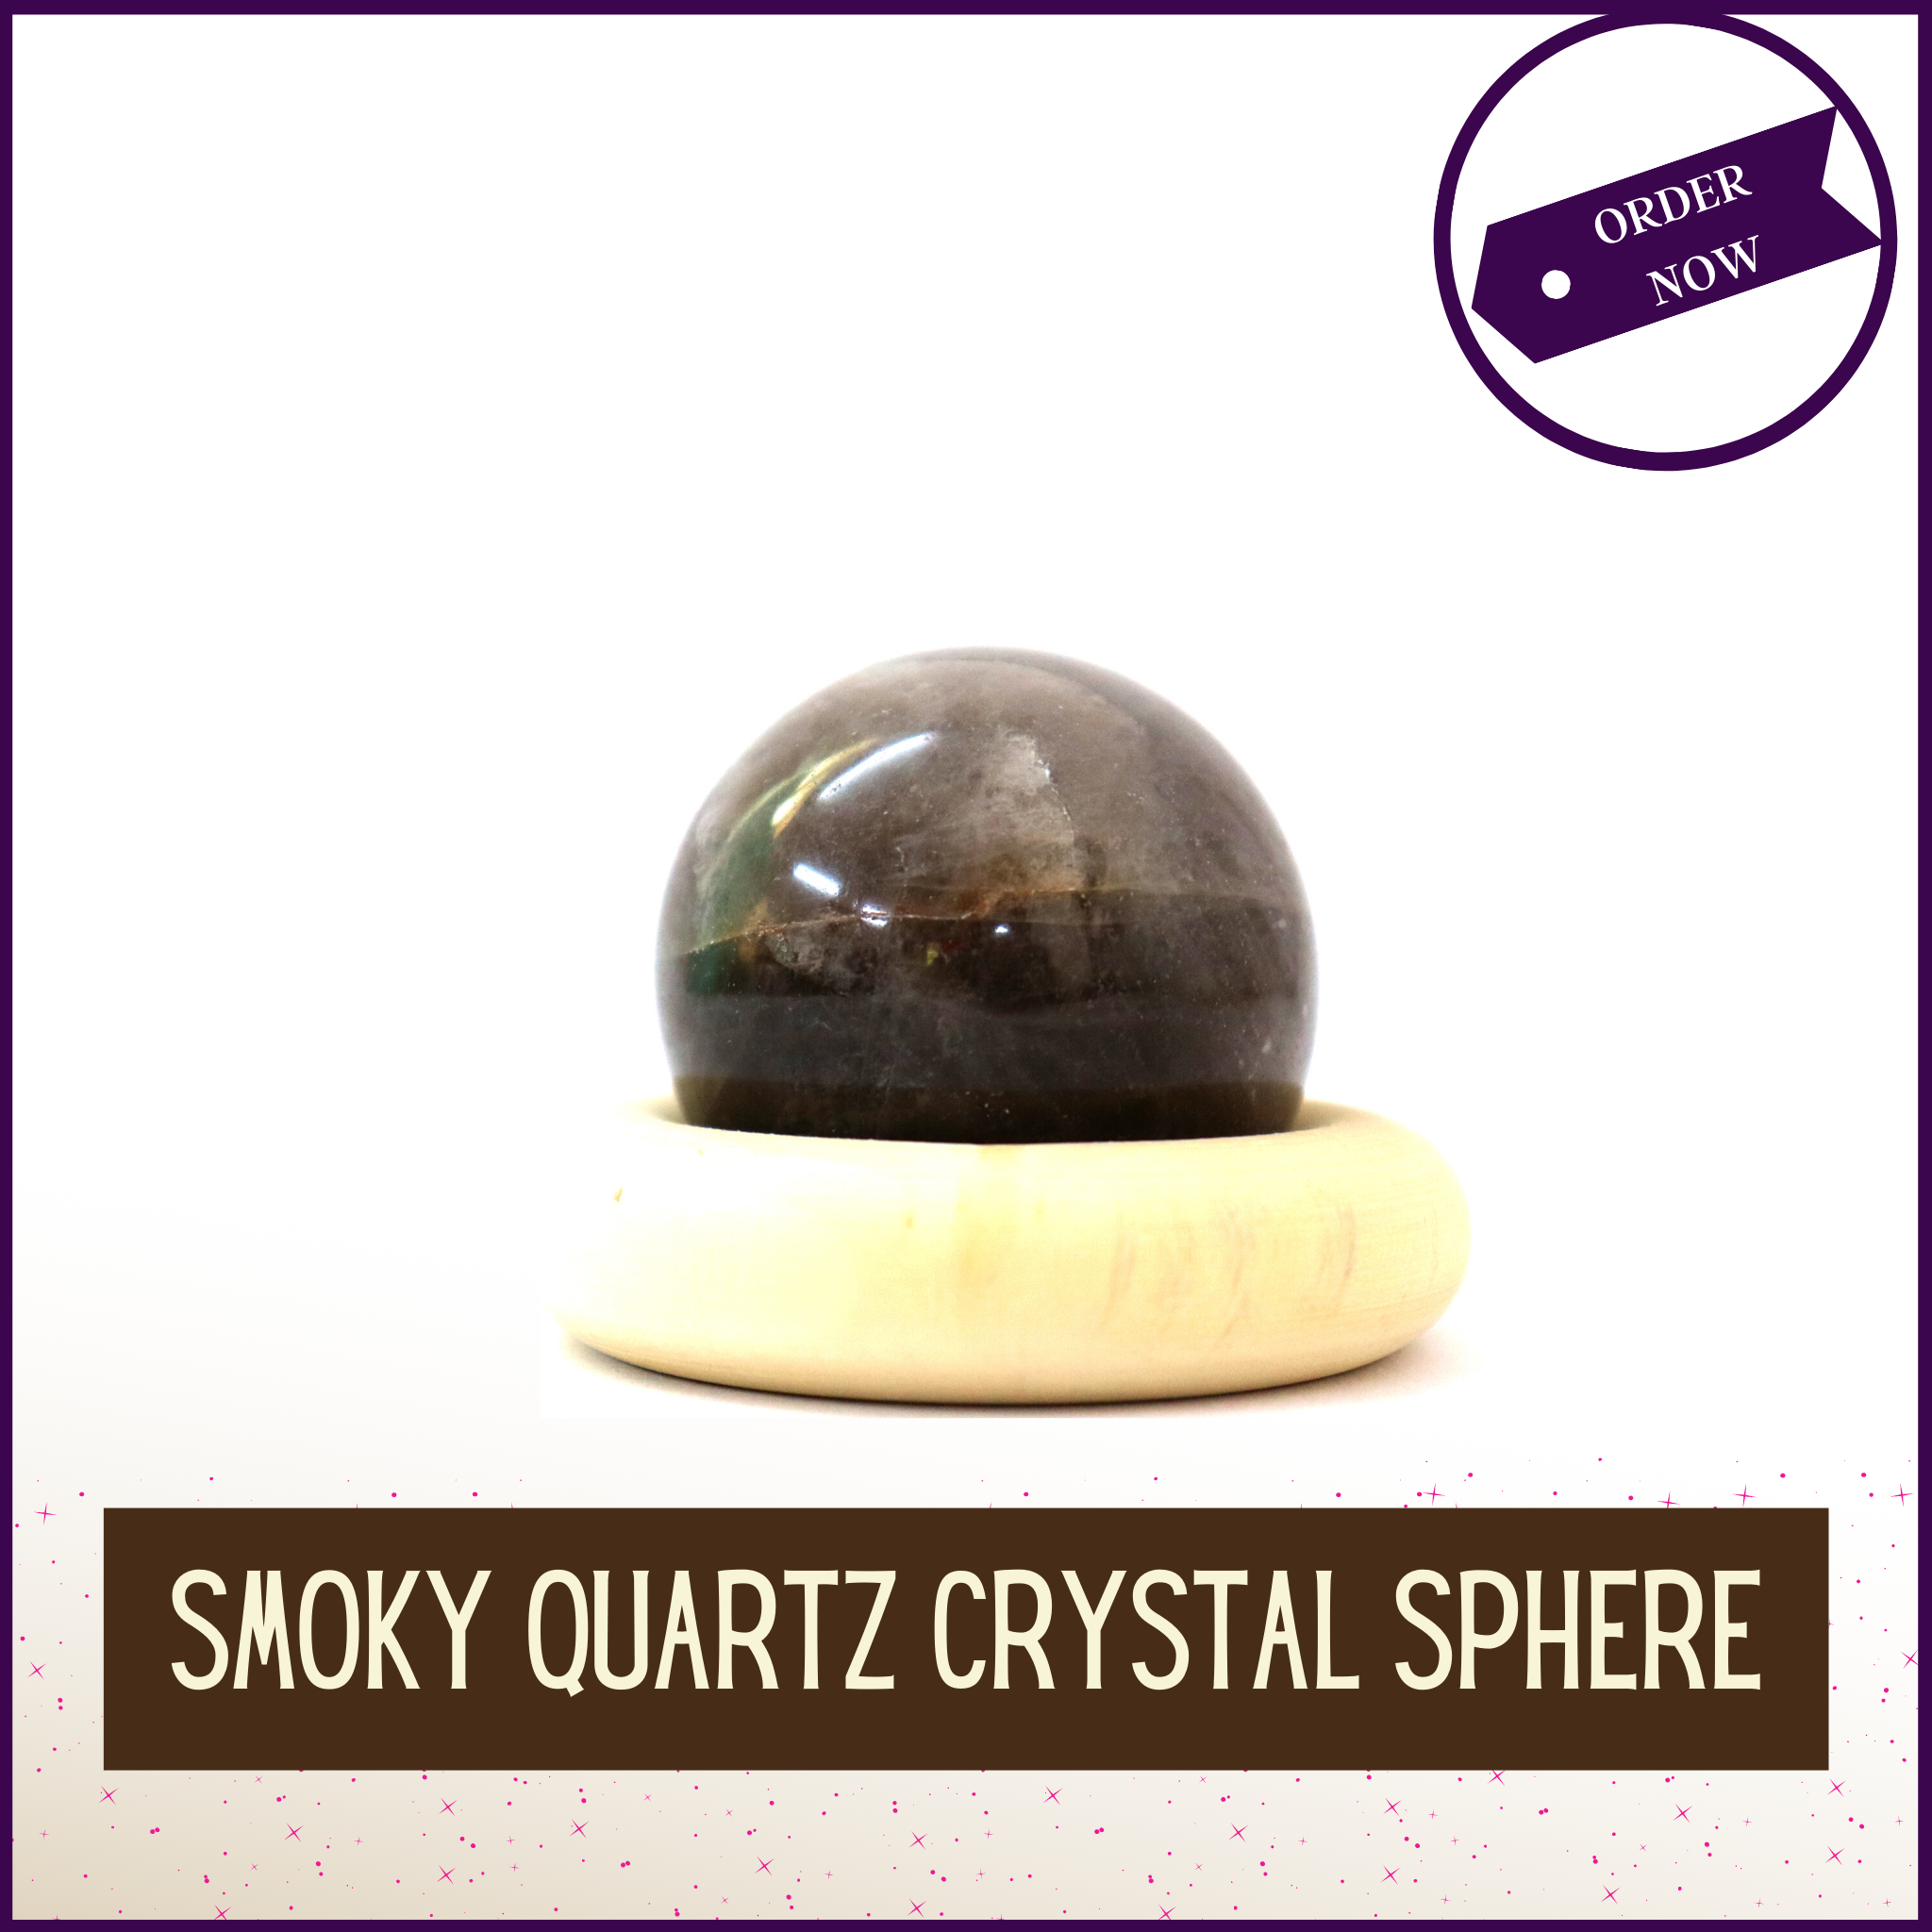 Smoky Quartz Crystal Sphere For Achieving Nirvana State In